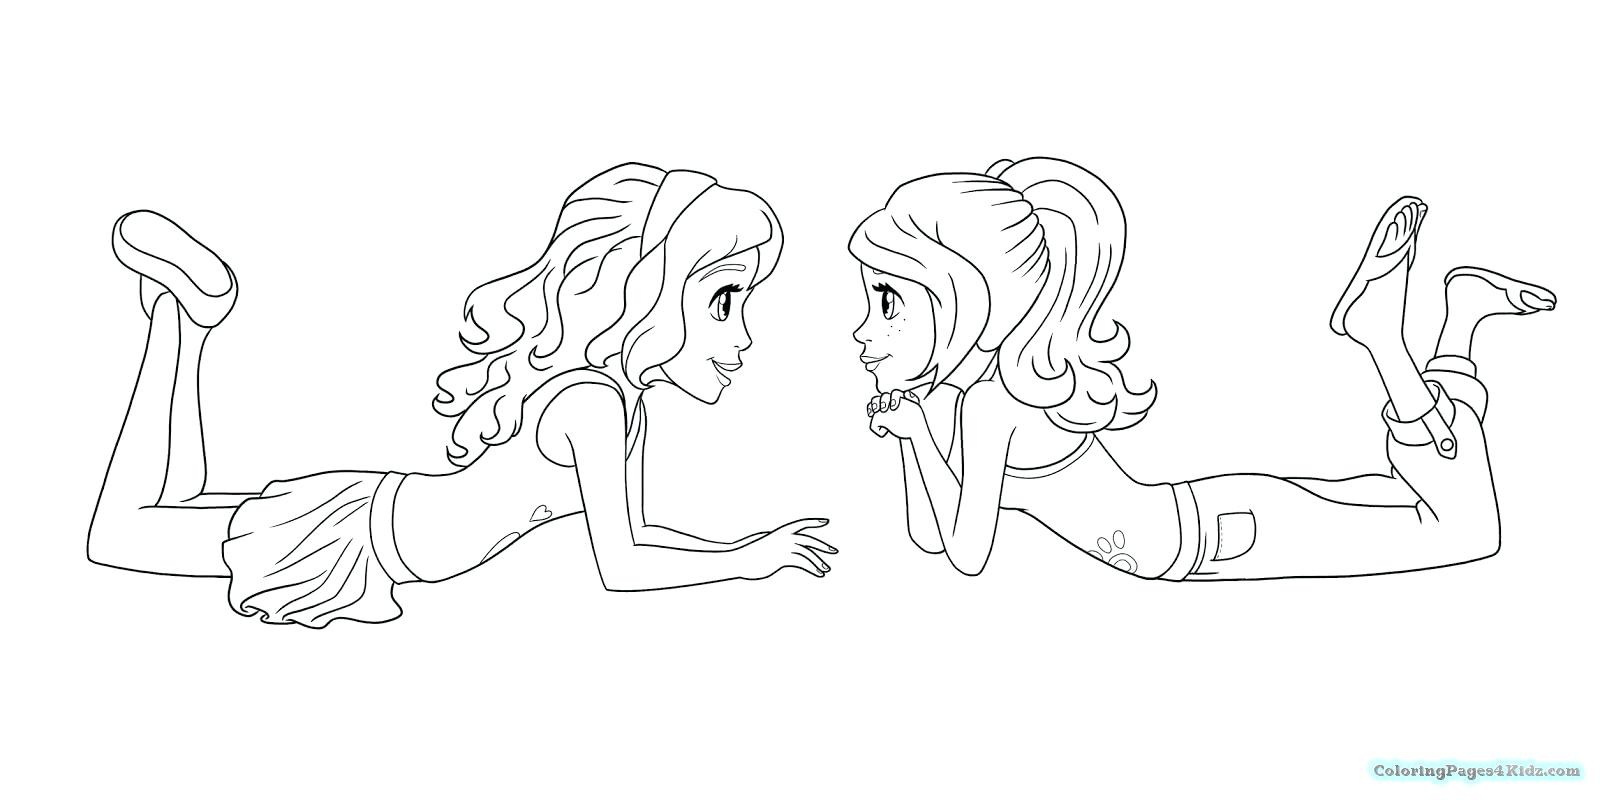 Lego Friends Printable Coloring Pages Coloring Book Lego Friends Coloringges To Print Free Little